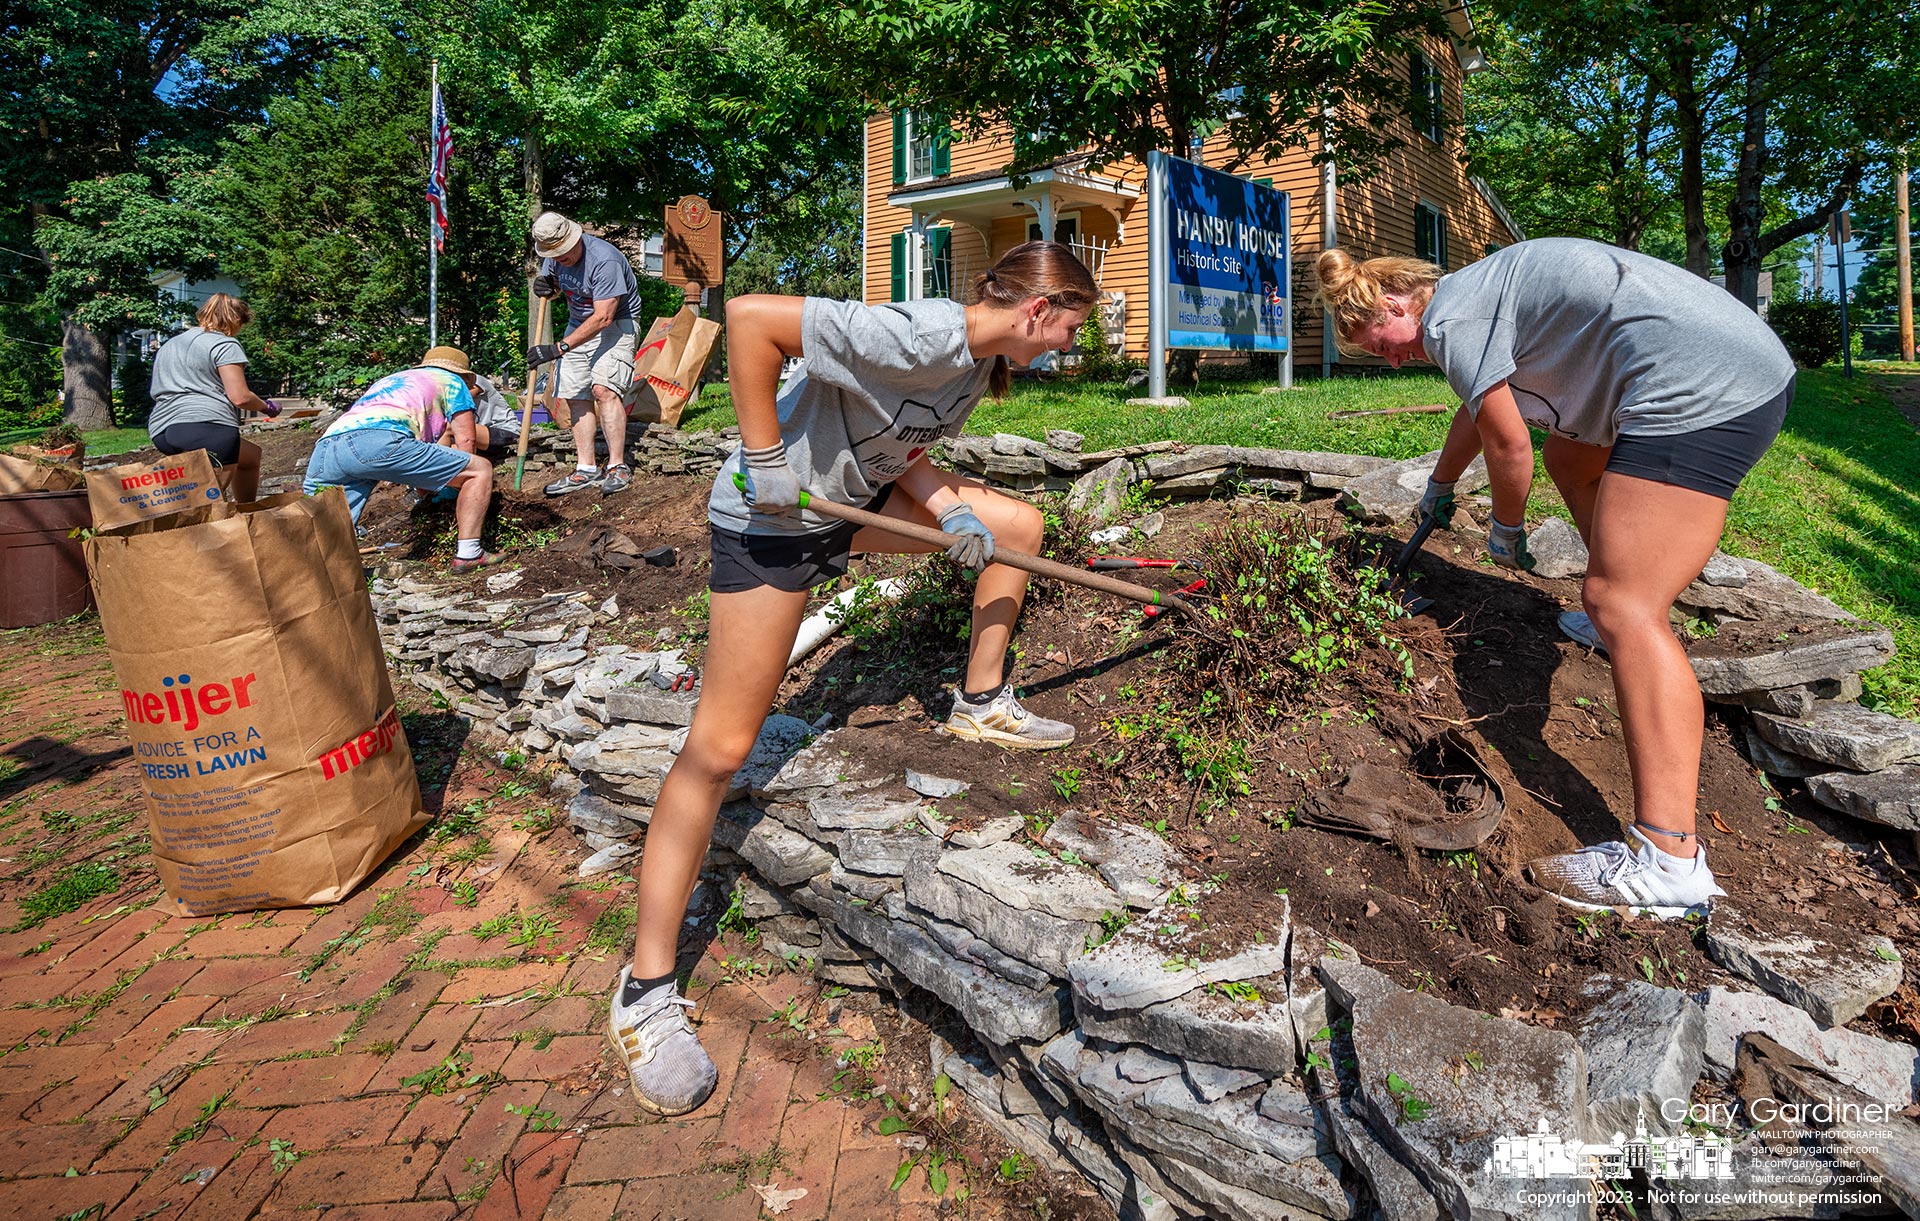 Volunteeers and Otterbein students fulfilling a community service day remove shrubs and plants from the front of the yard of the Hanby House on West Main before the historic site's lawn and rock ledge is upgraded. My Final Photo for August 19, 2023.